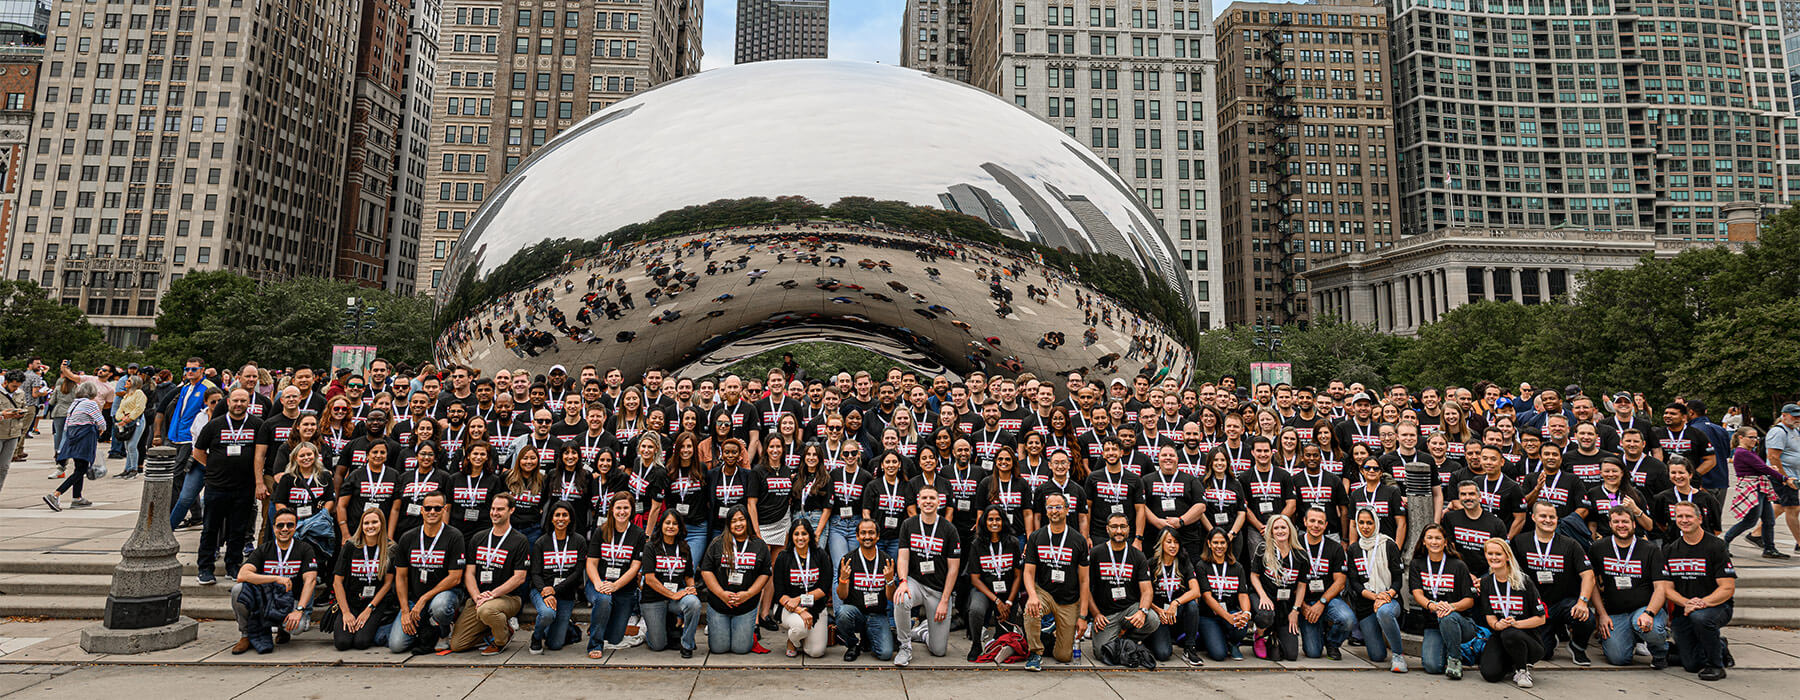 More than 100 Kelley Direct students pose in front of Cloud Gate or The Bean in Chicago's Millennium Park during a Kelley On Location event for online MBA students.